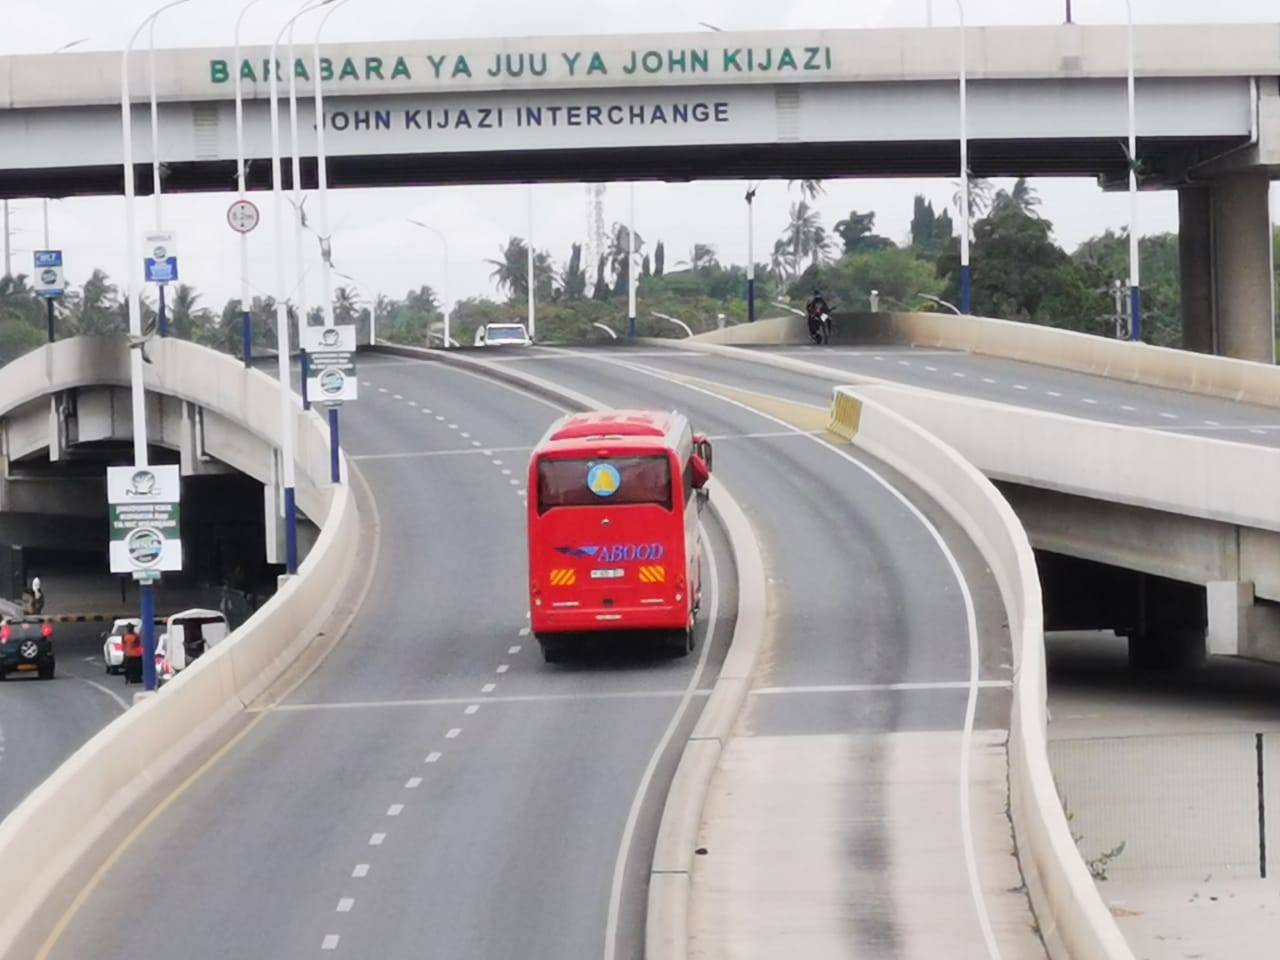 bus drives up on-ramp on new-looking road